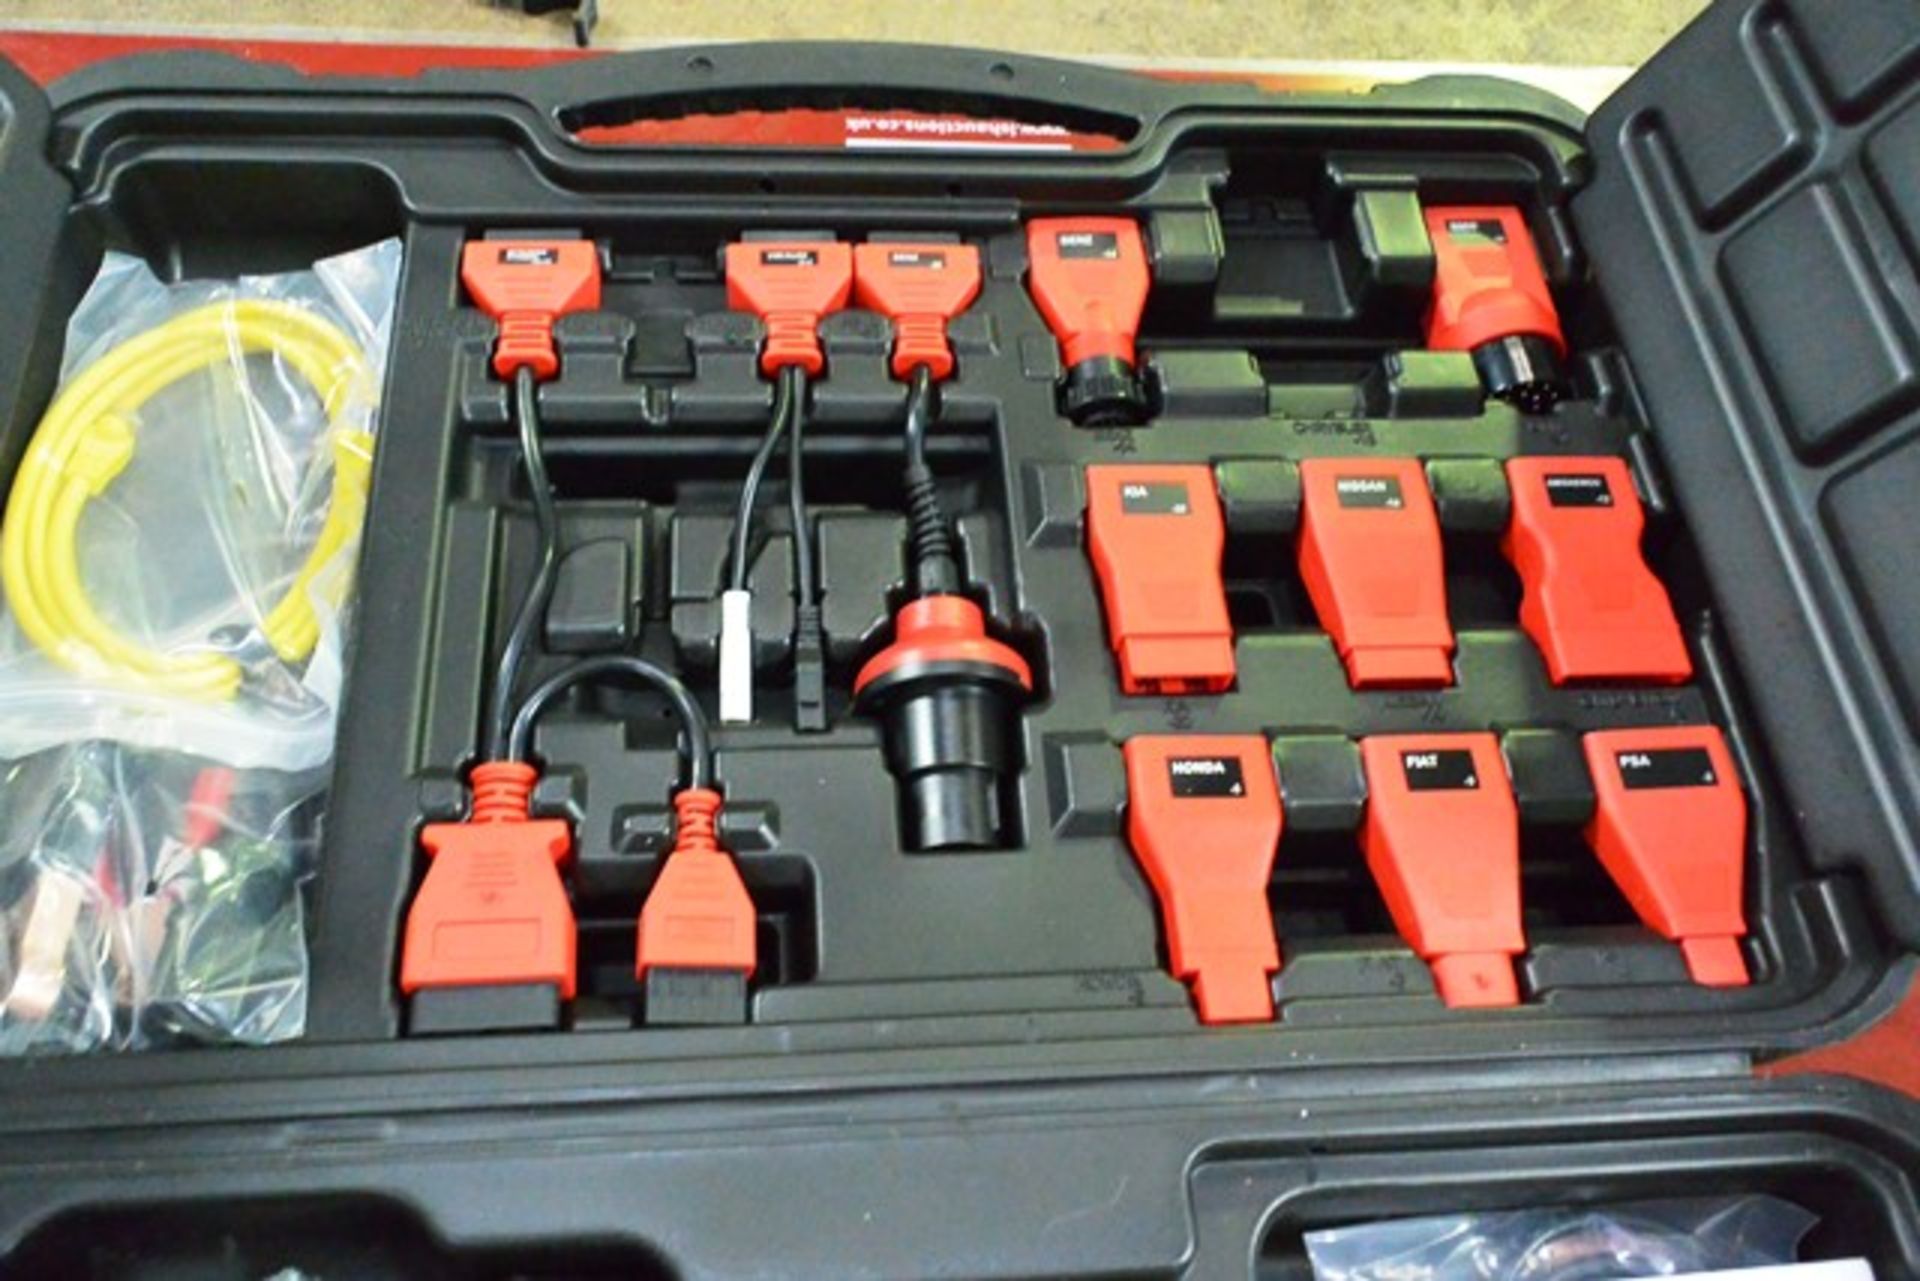 Autel Maxi Sys MS9085 Pro diagnostic touch screen tablet, associated connectors and carry case - Image 4 of 6